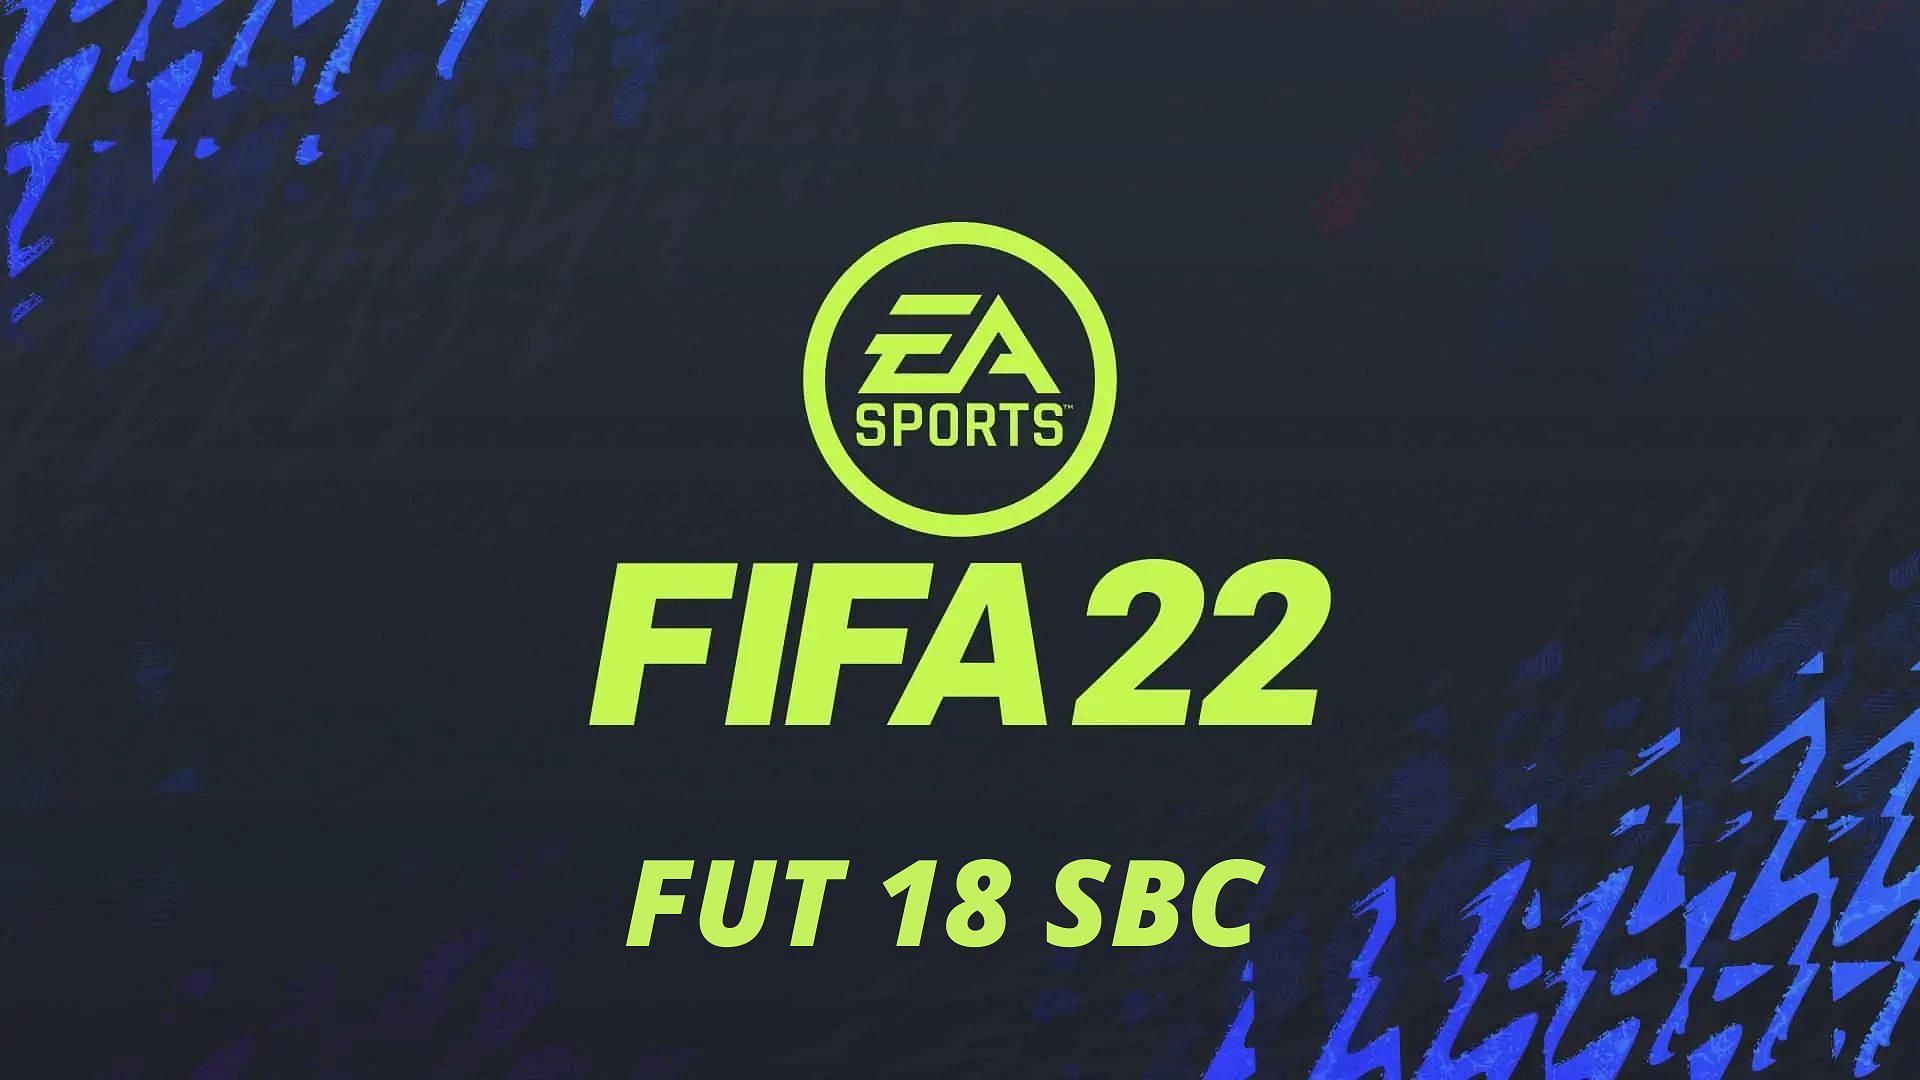 FIFA 22 Ultimate Team: How to complete the FUT 18 SBC in FUT 22